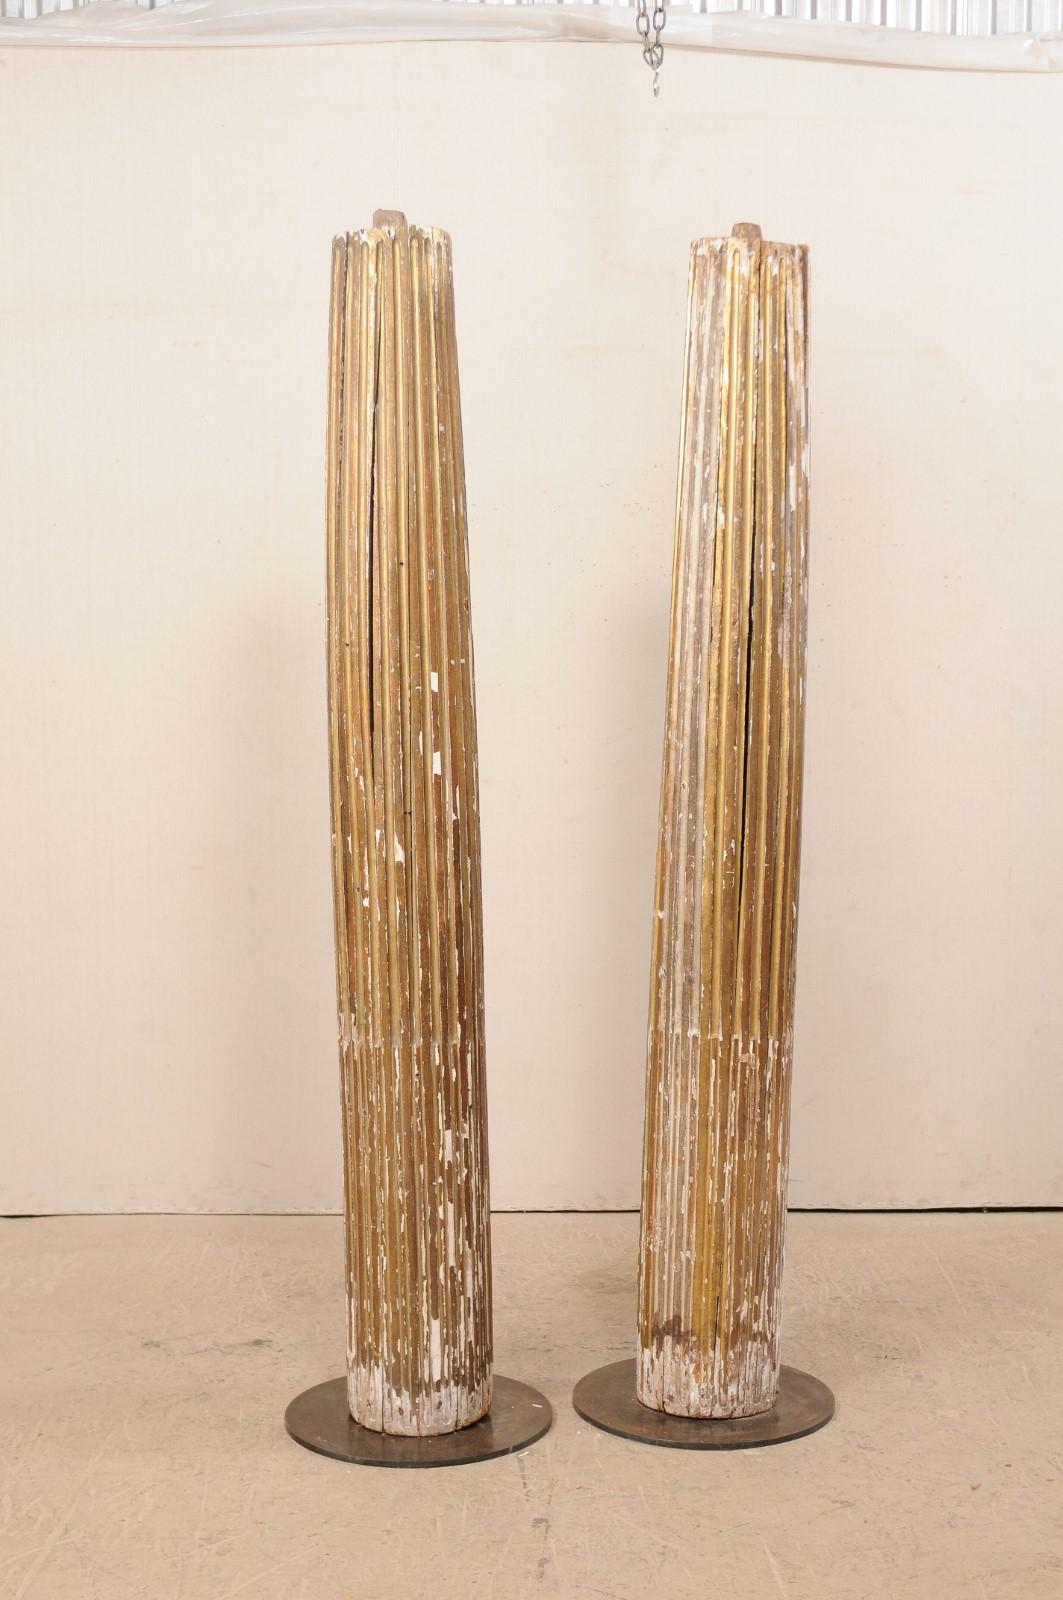 Carved An 18th Century Pair of Italian 7 Ft Tall Fluted & Gilded Wood Columns on Bases